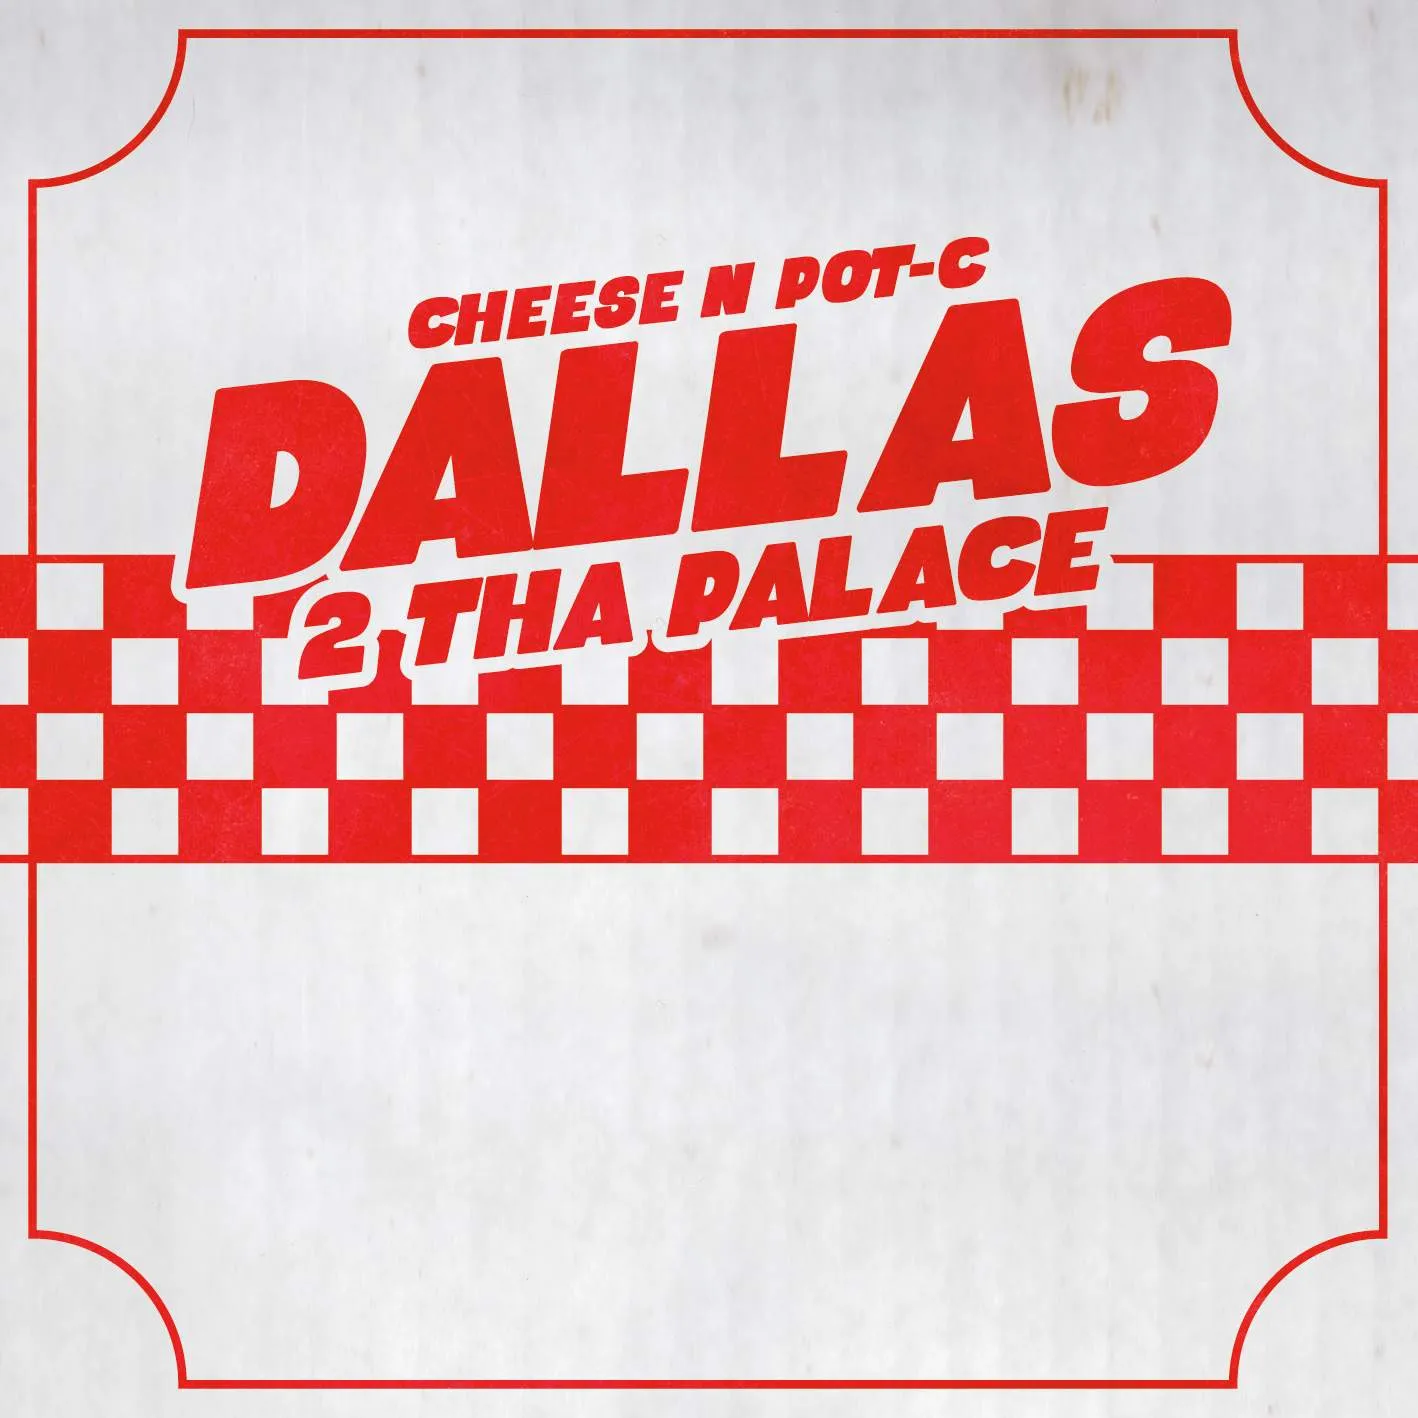 Album cover for “Dallas 2 Tha Palace” by Cheese N Pot-C